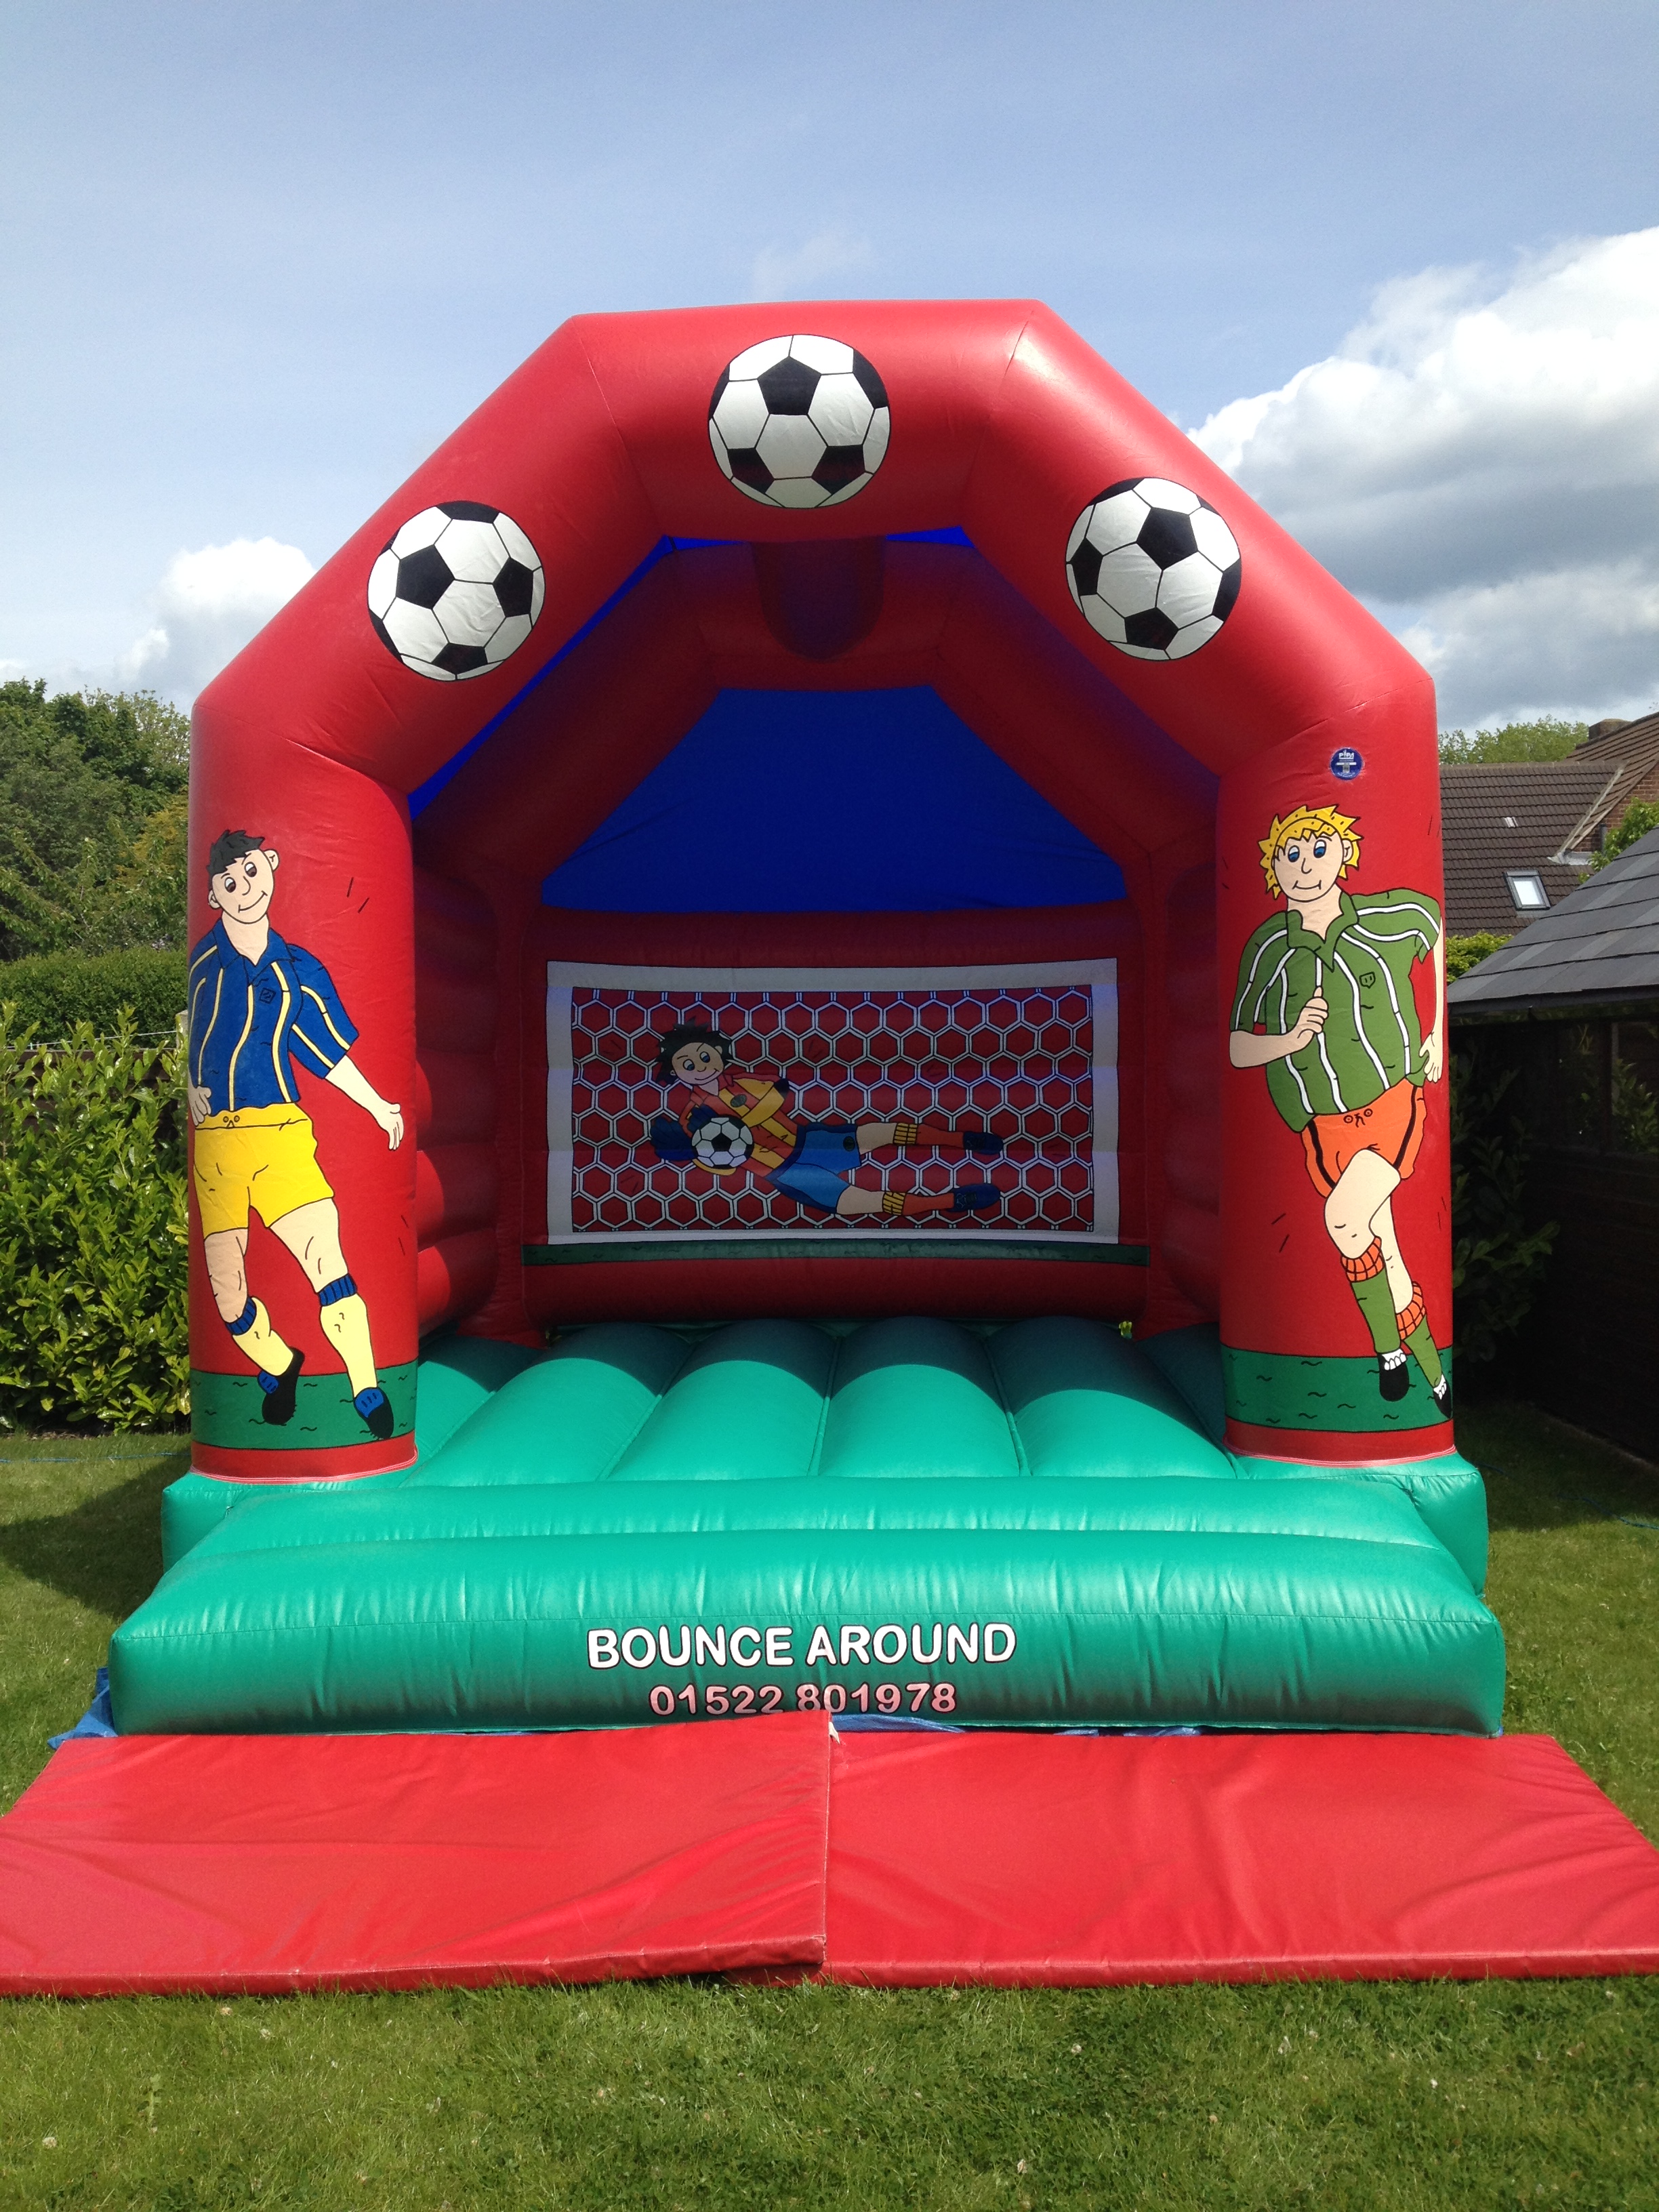 Lincoln Bouncy Castle Pic 3